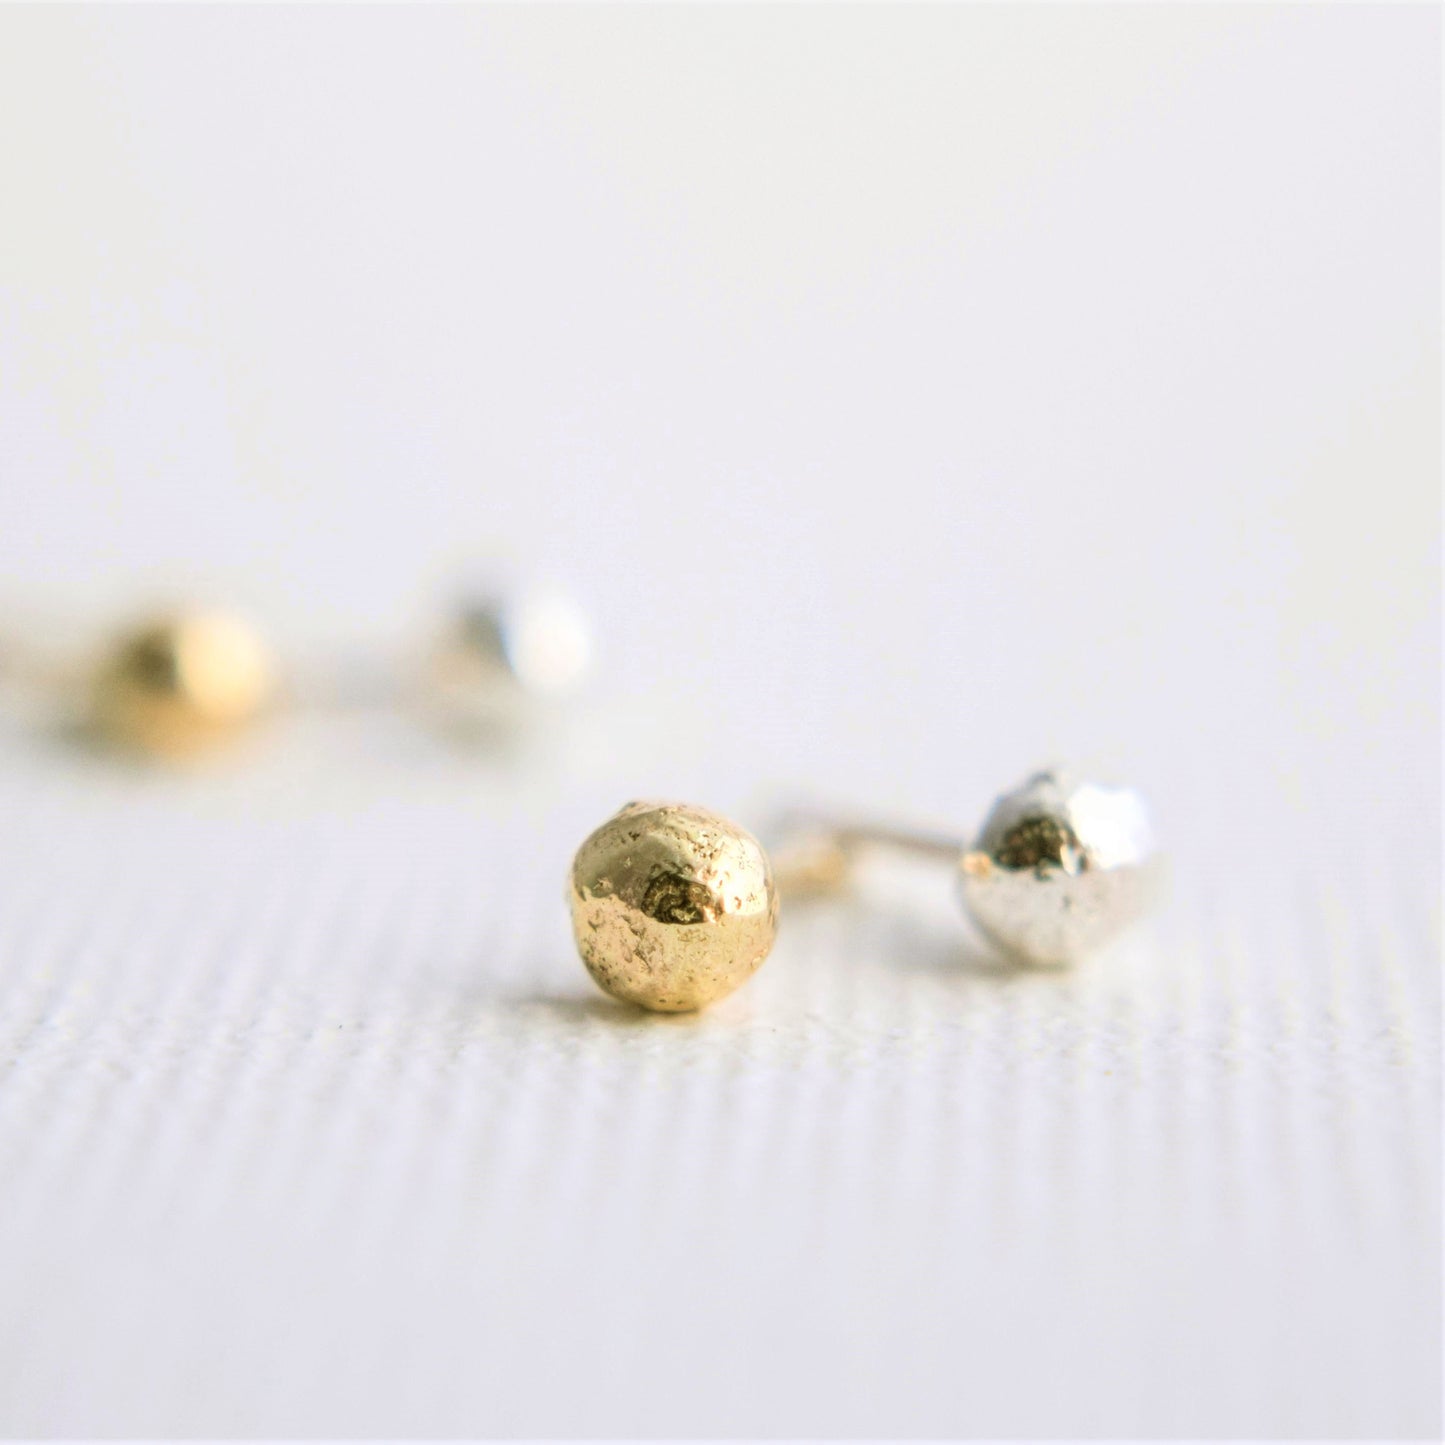 close up image of one gold and one silver organic ball stud showing the organic texture